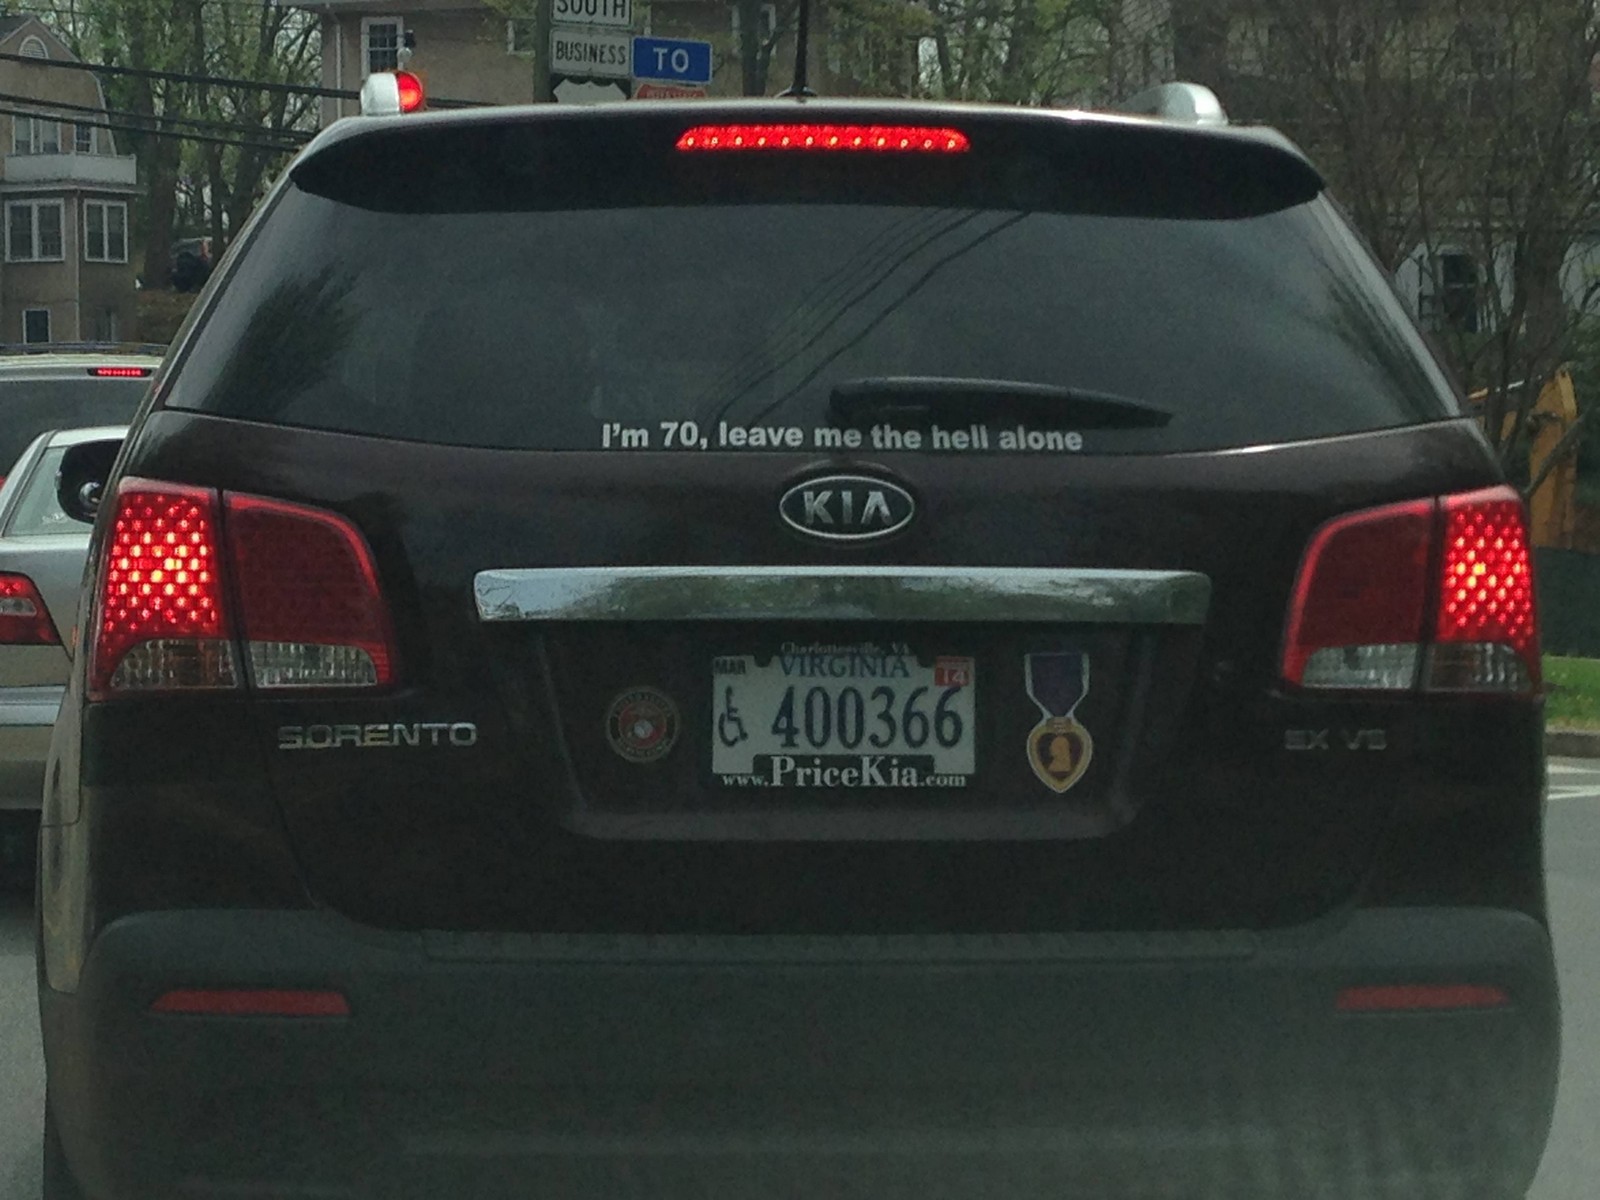 27 Funny Bumper Stickers - I think he/she deserves it.